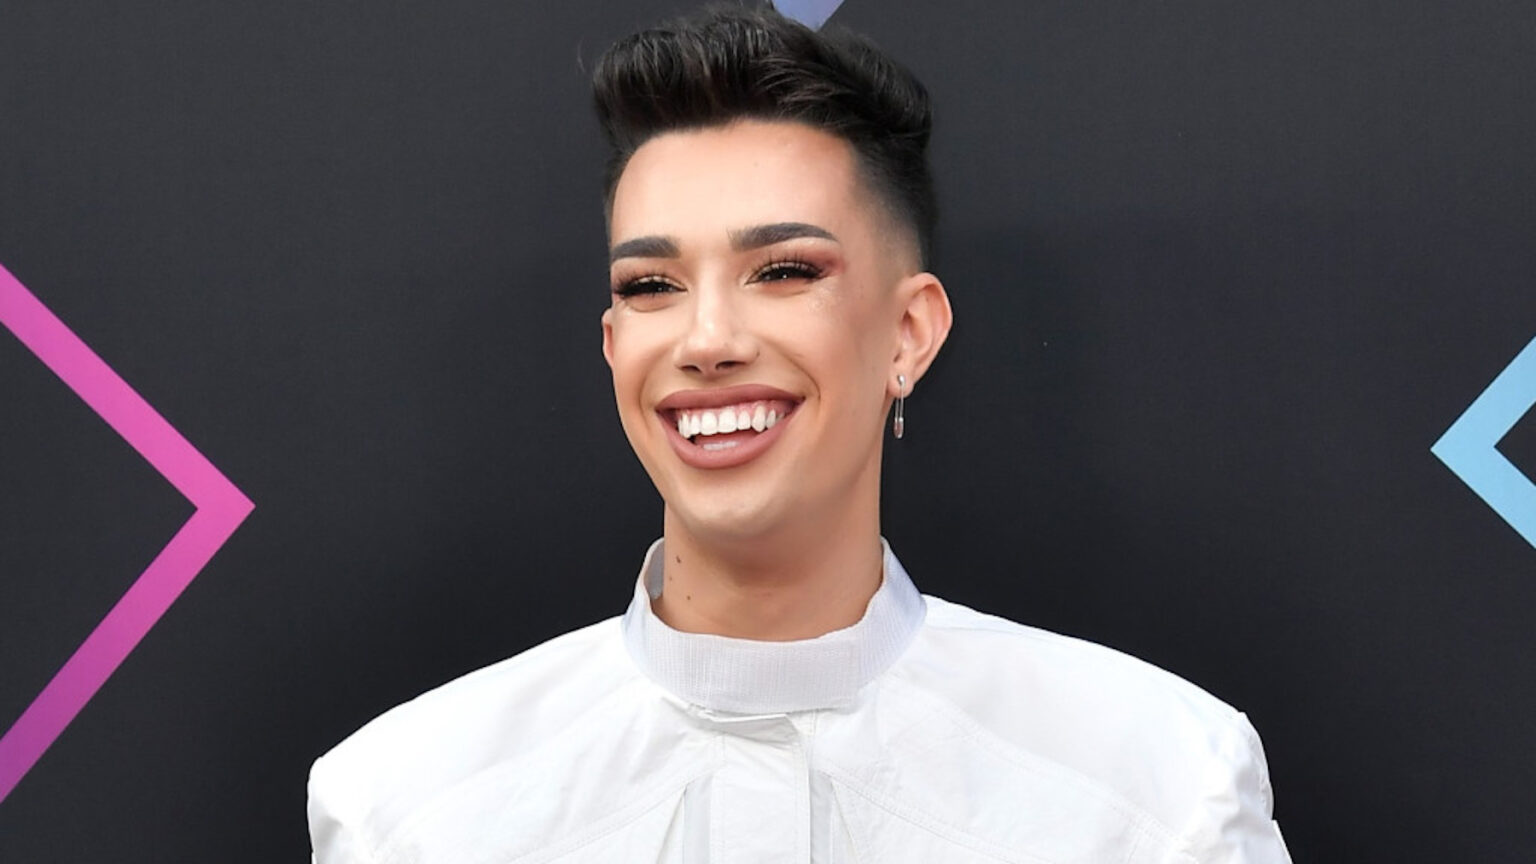 James Charles releases *another* not-apology apology video. Scream with Twitter over the frustration of him not being cancelled yet.